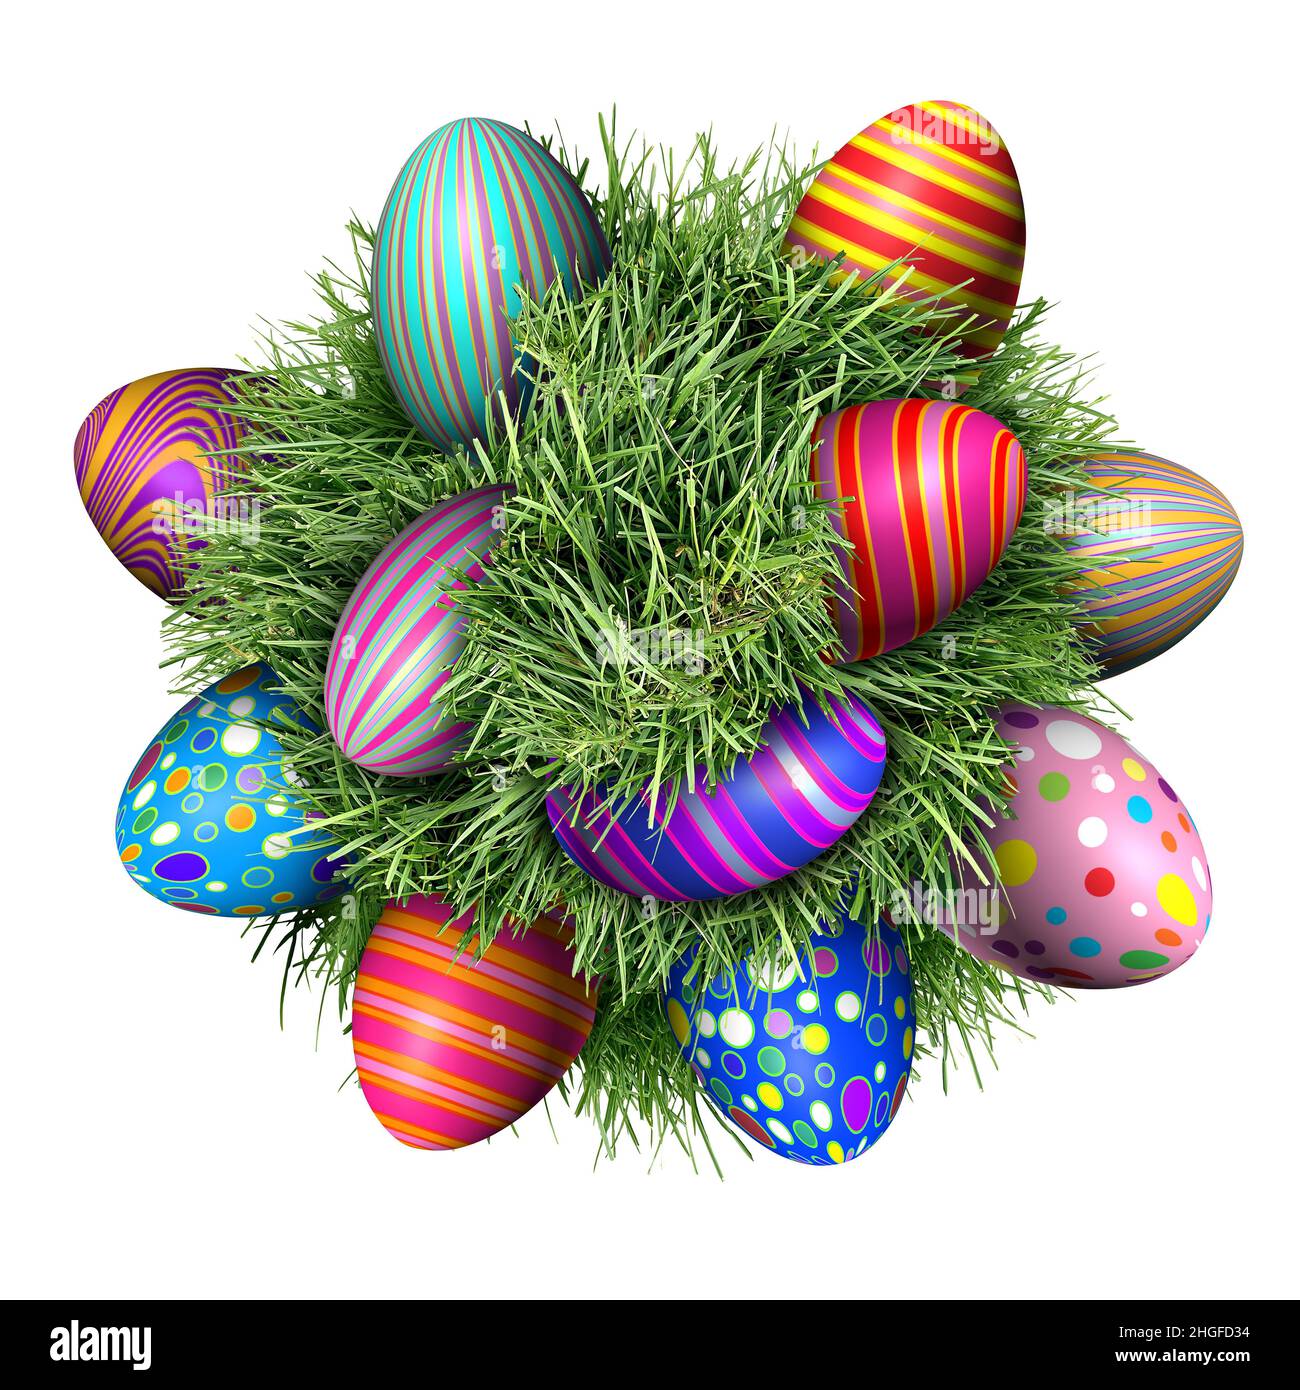 Easter Egg hunt with decorated eggs sitting in a green grass ball as a symbol of spring and a festive April holiday decoration and design element. Stock Photo